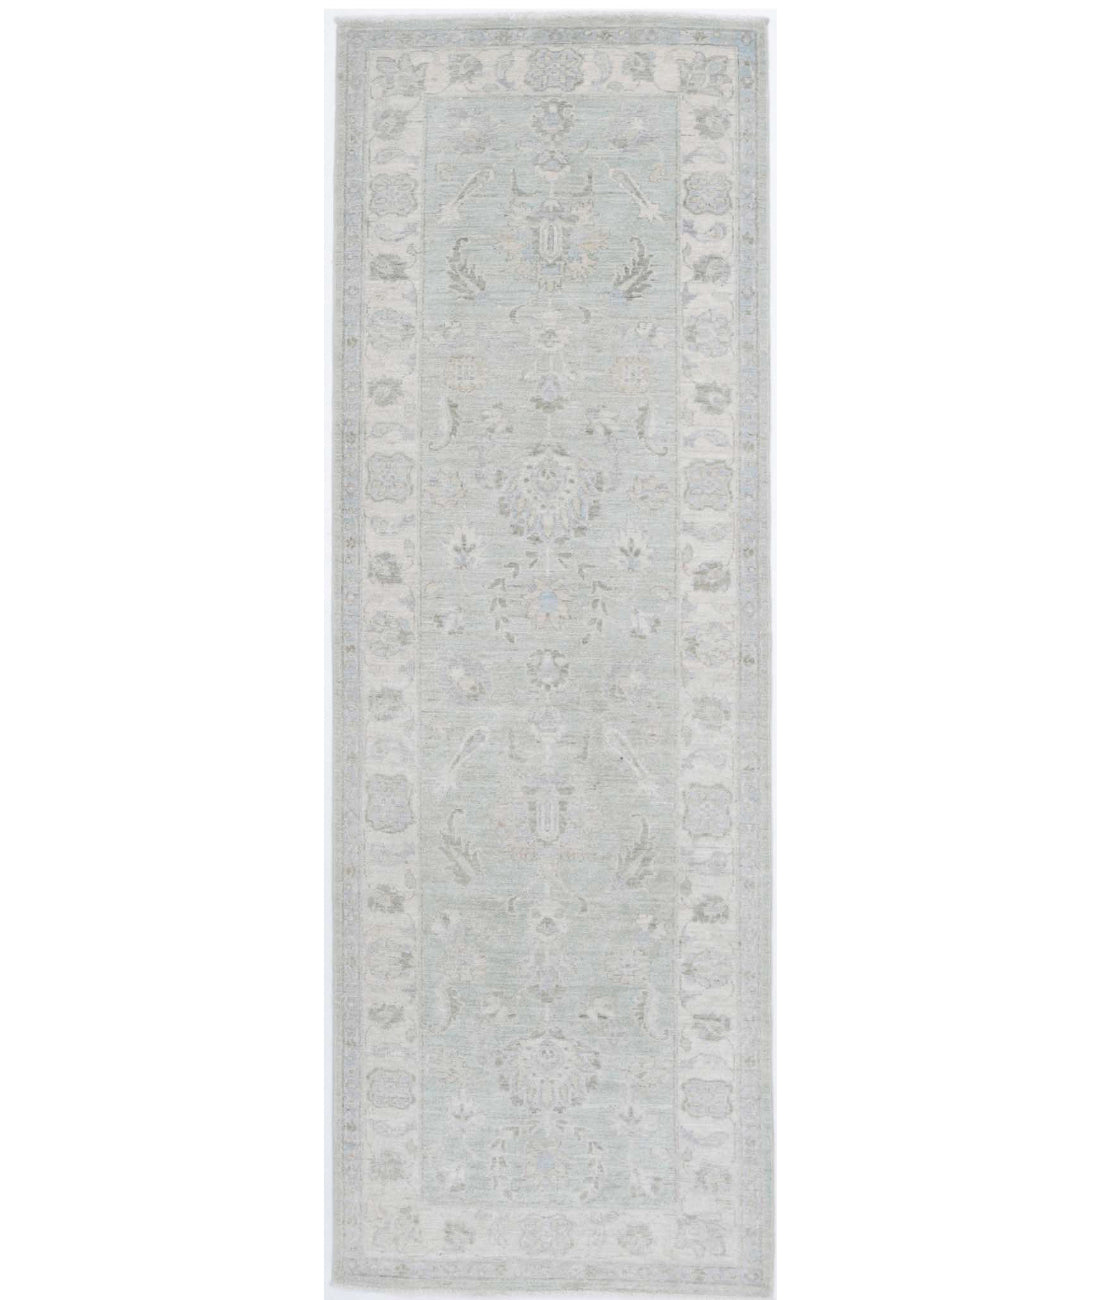 Hand Knotted Serenity Wool Rug - 2'6'' x 8'1'' 2'6'' x 8'1'' (75 X 243) / Grey / Ivory